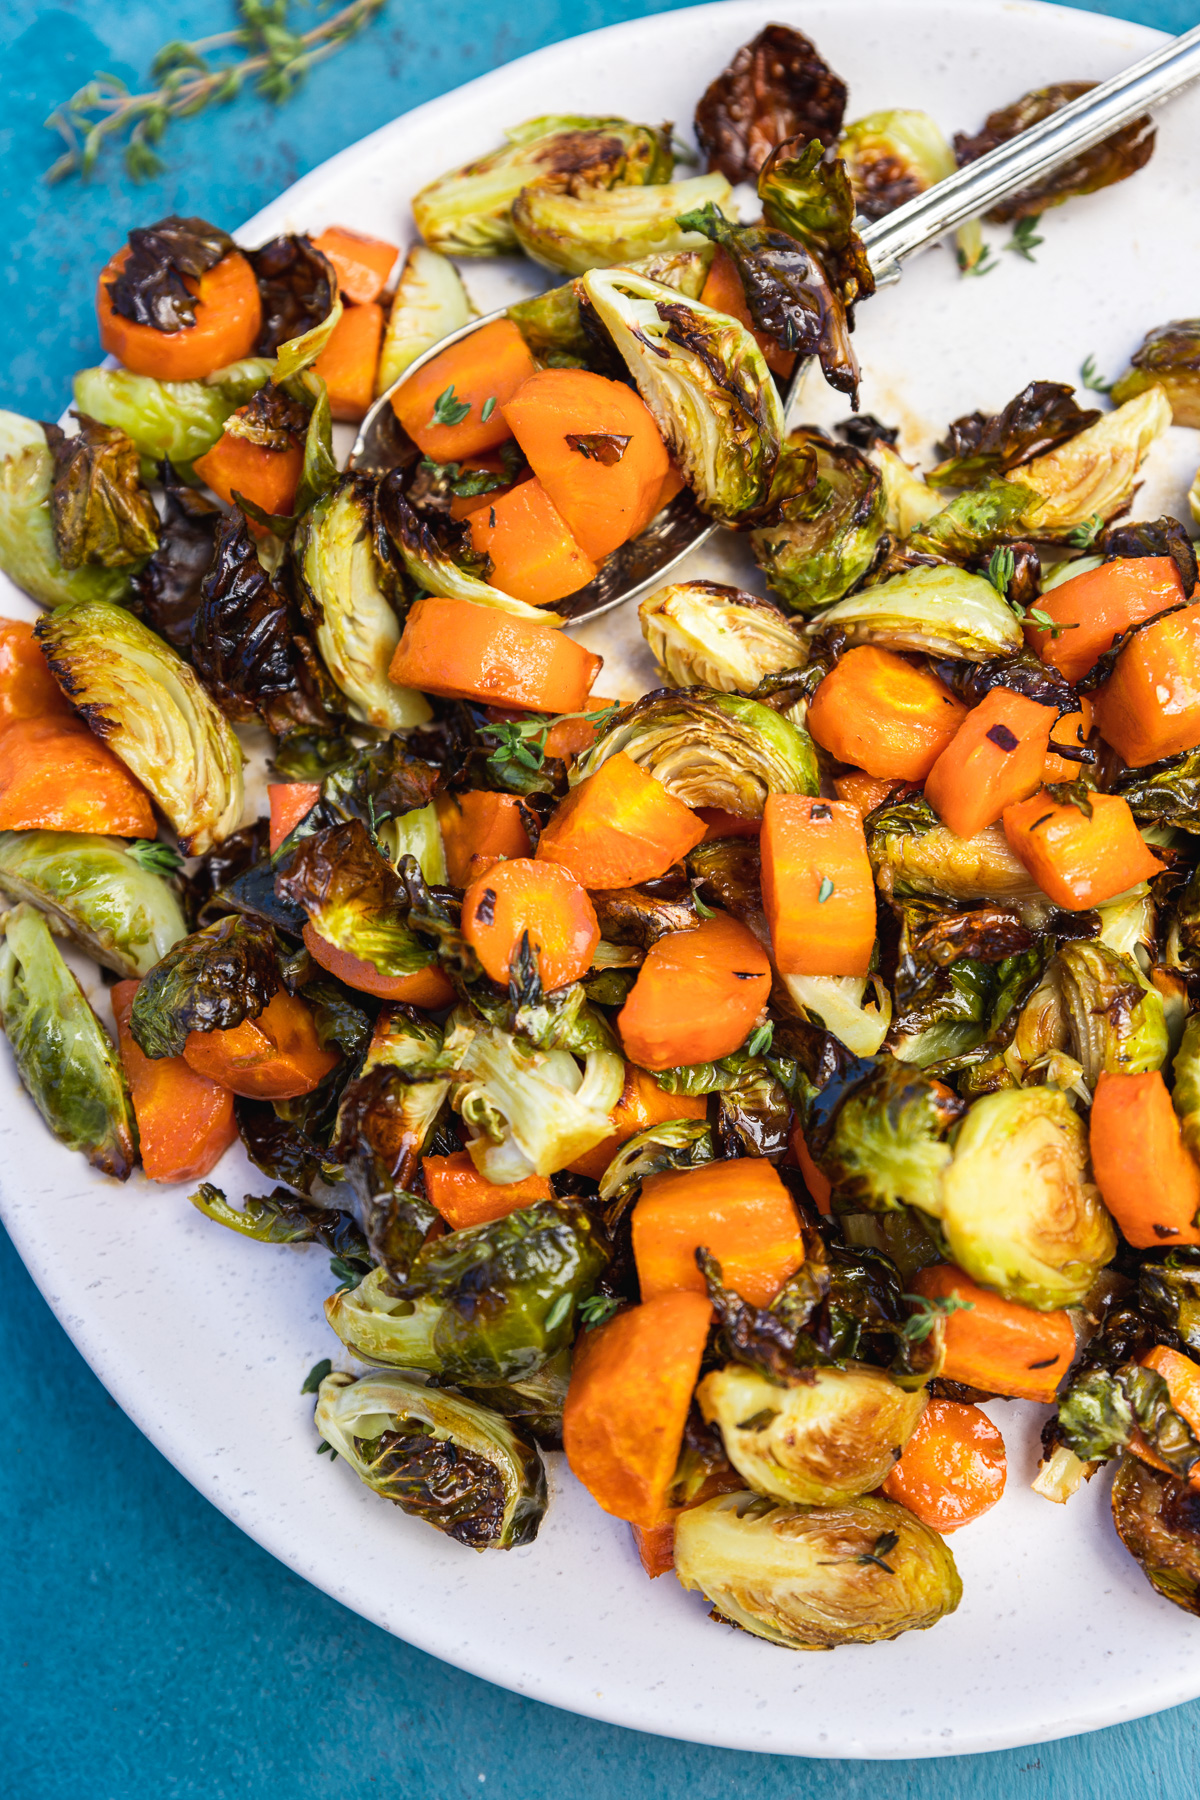 Closeup of roasted brussels sprouts and carrots on a white plate and blue background